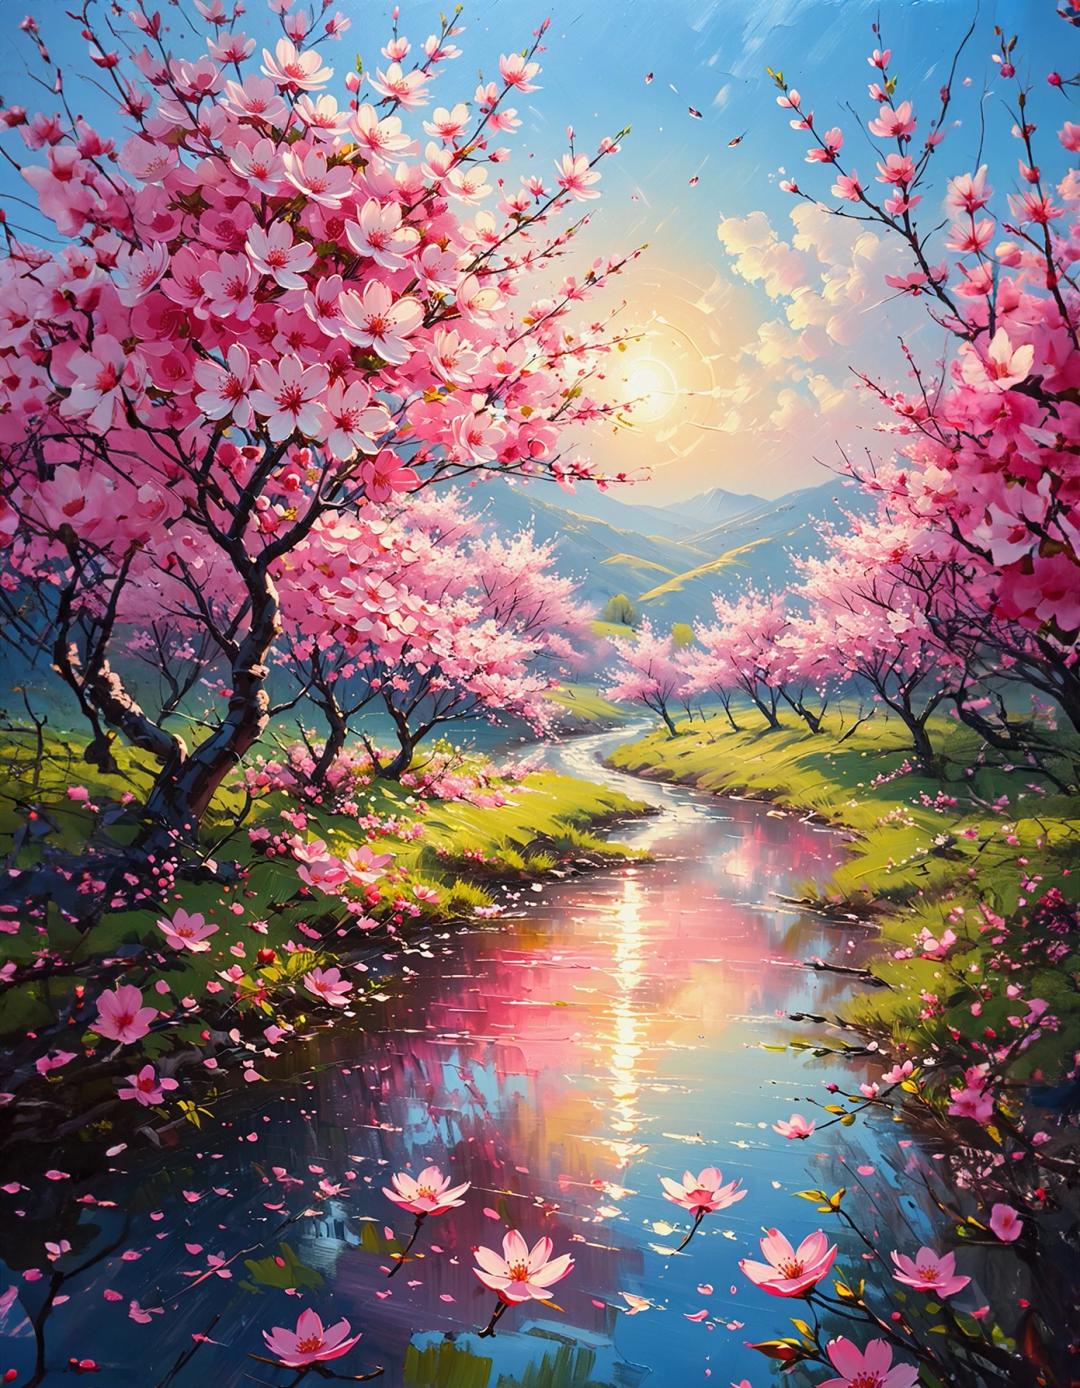 oil painting, Cherry blossoms, Sky (blue), Flowers (pink), Natural scenery